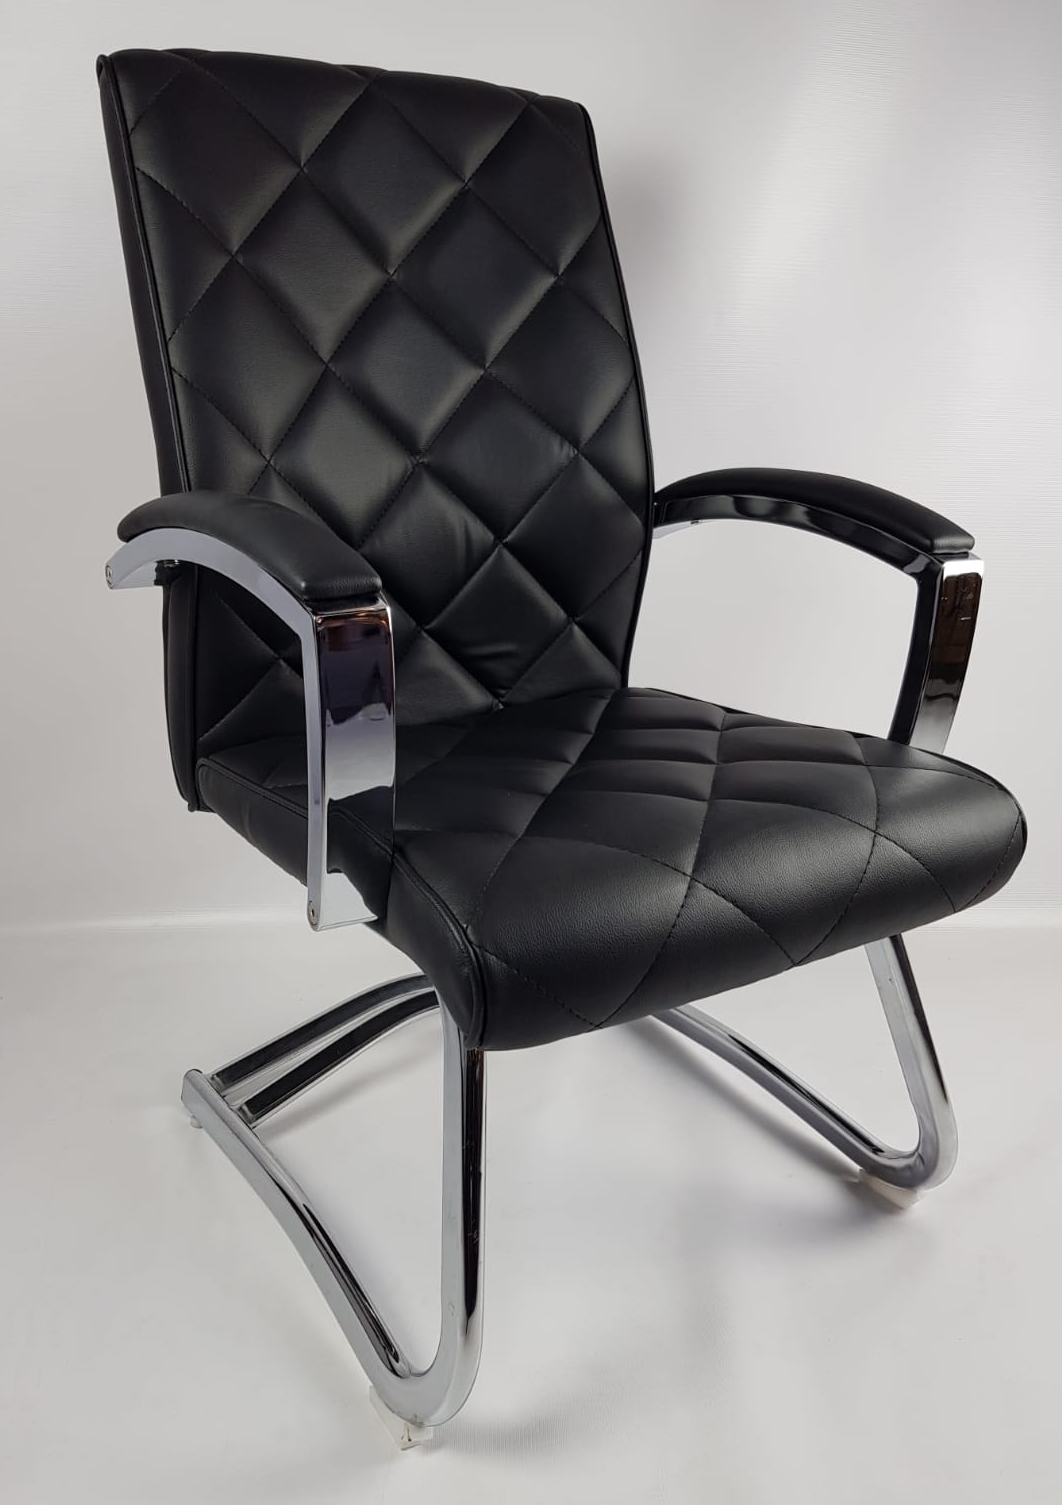 Quilted Black Leather Stylish Cantilever Visitors Chair - ZV-B217 Huddersfield